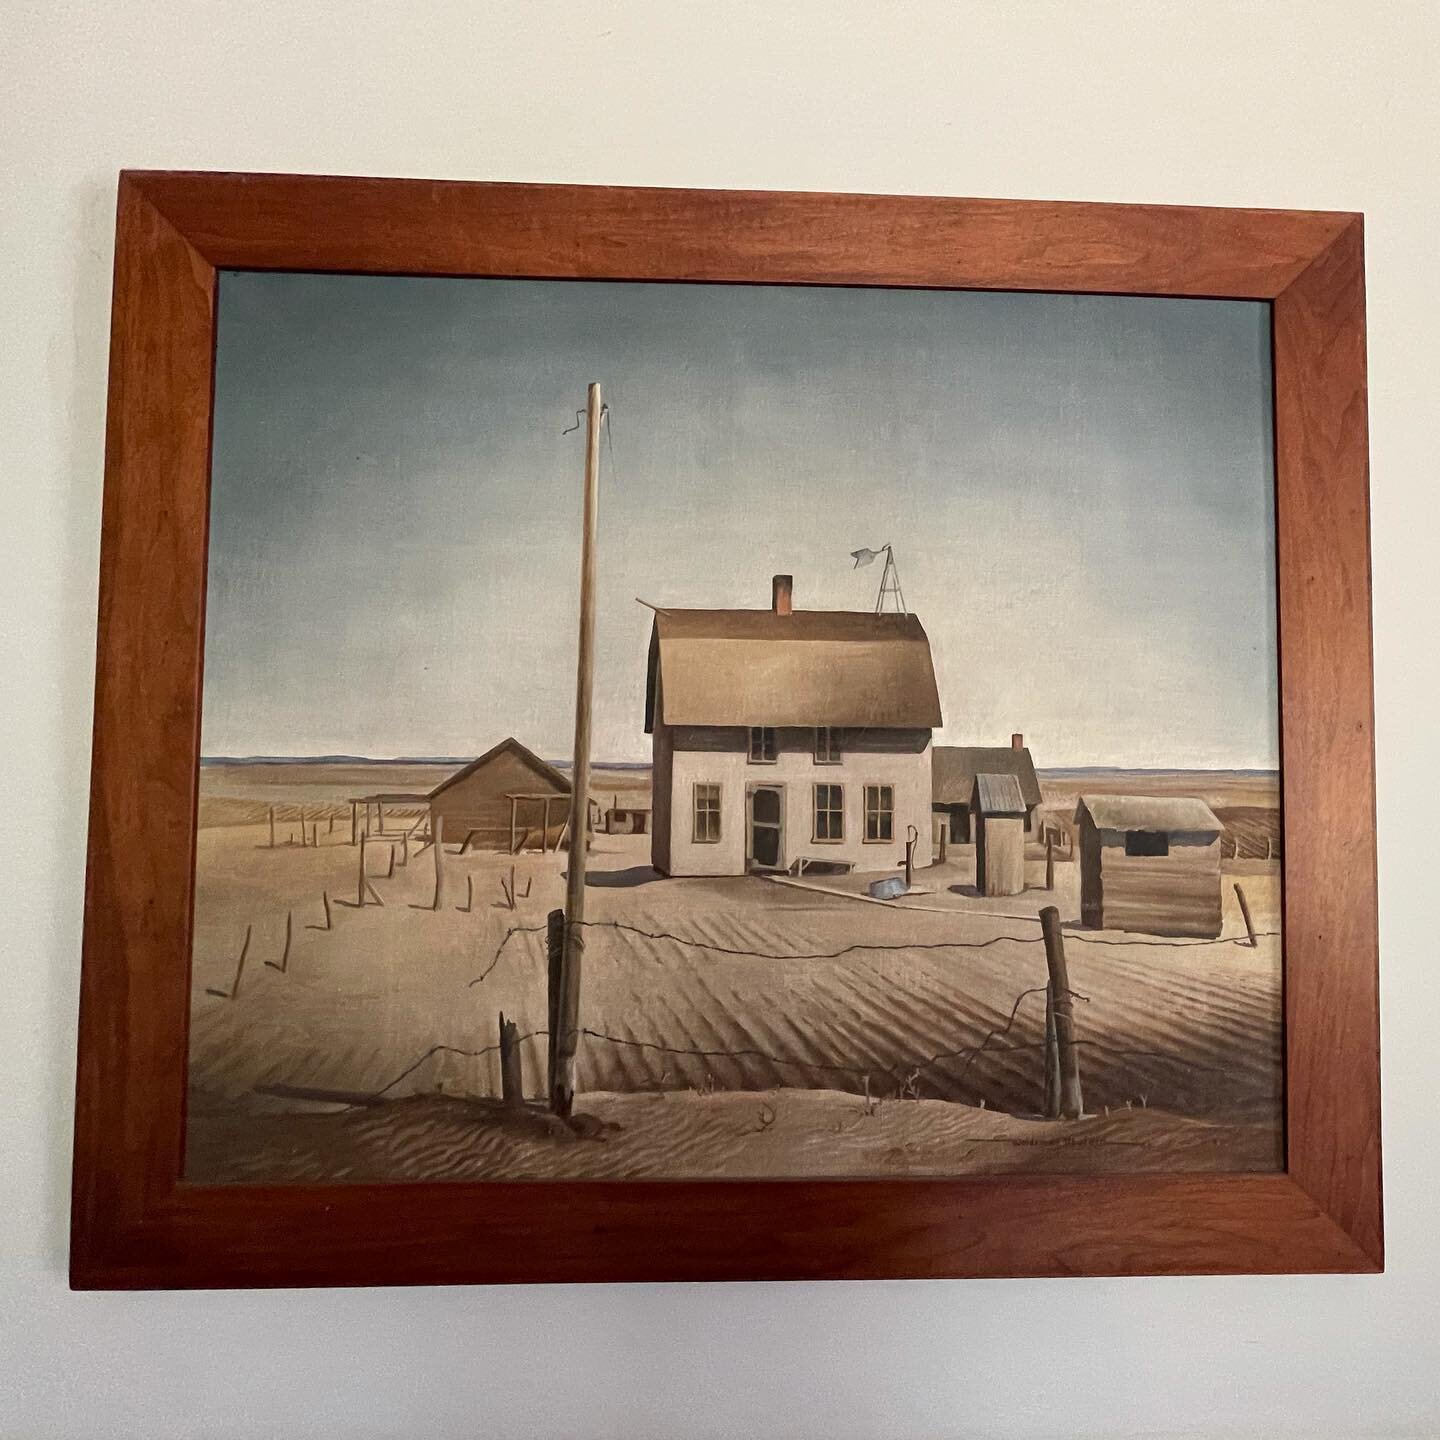 Painted by Woldemar Neufeld, 1938, in Montana. Woldemar was a Mennonite, born in Ukraine, in 1909. I met his son, Larry, in 1968, at Bard College.